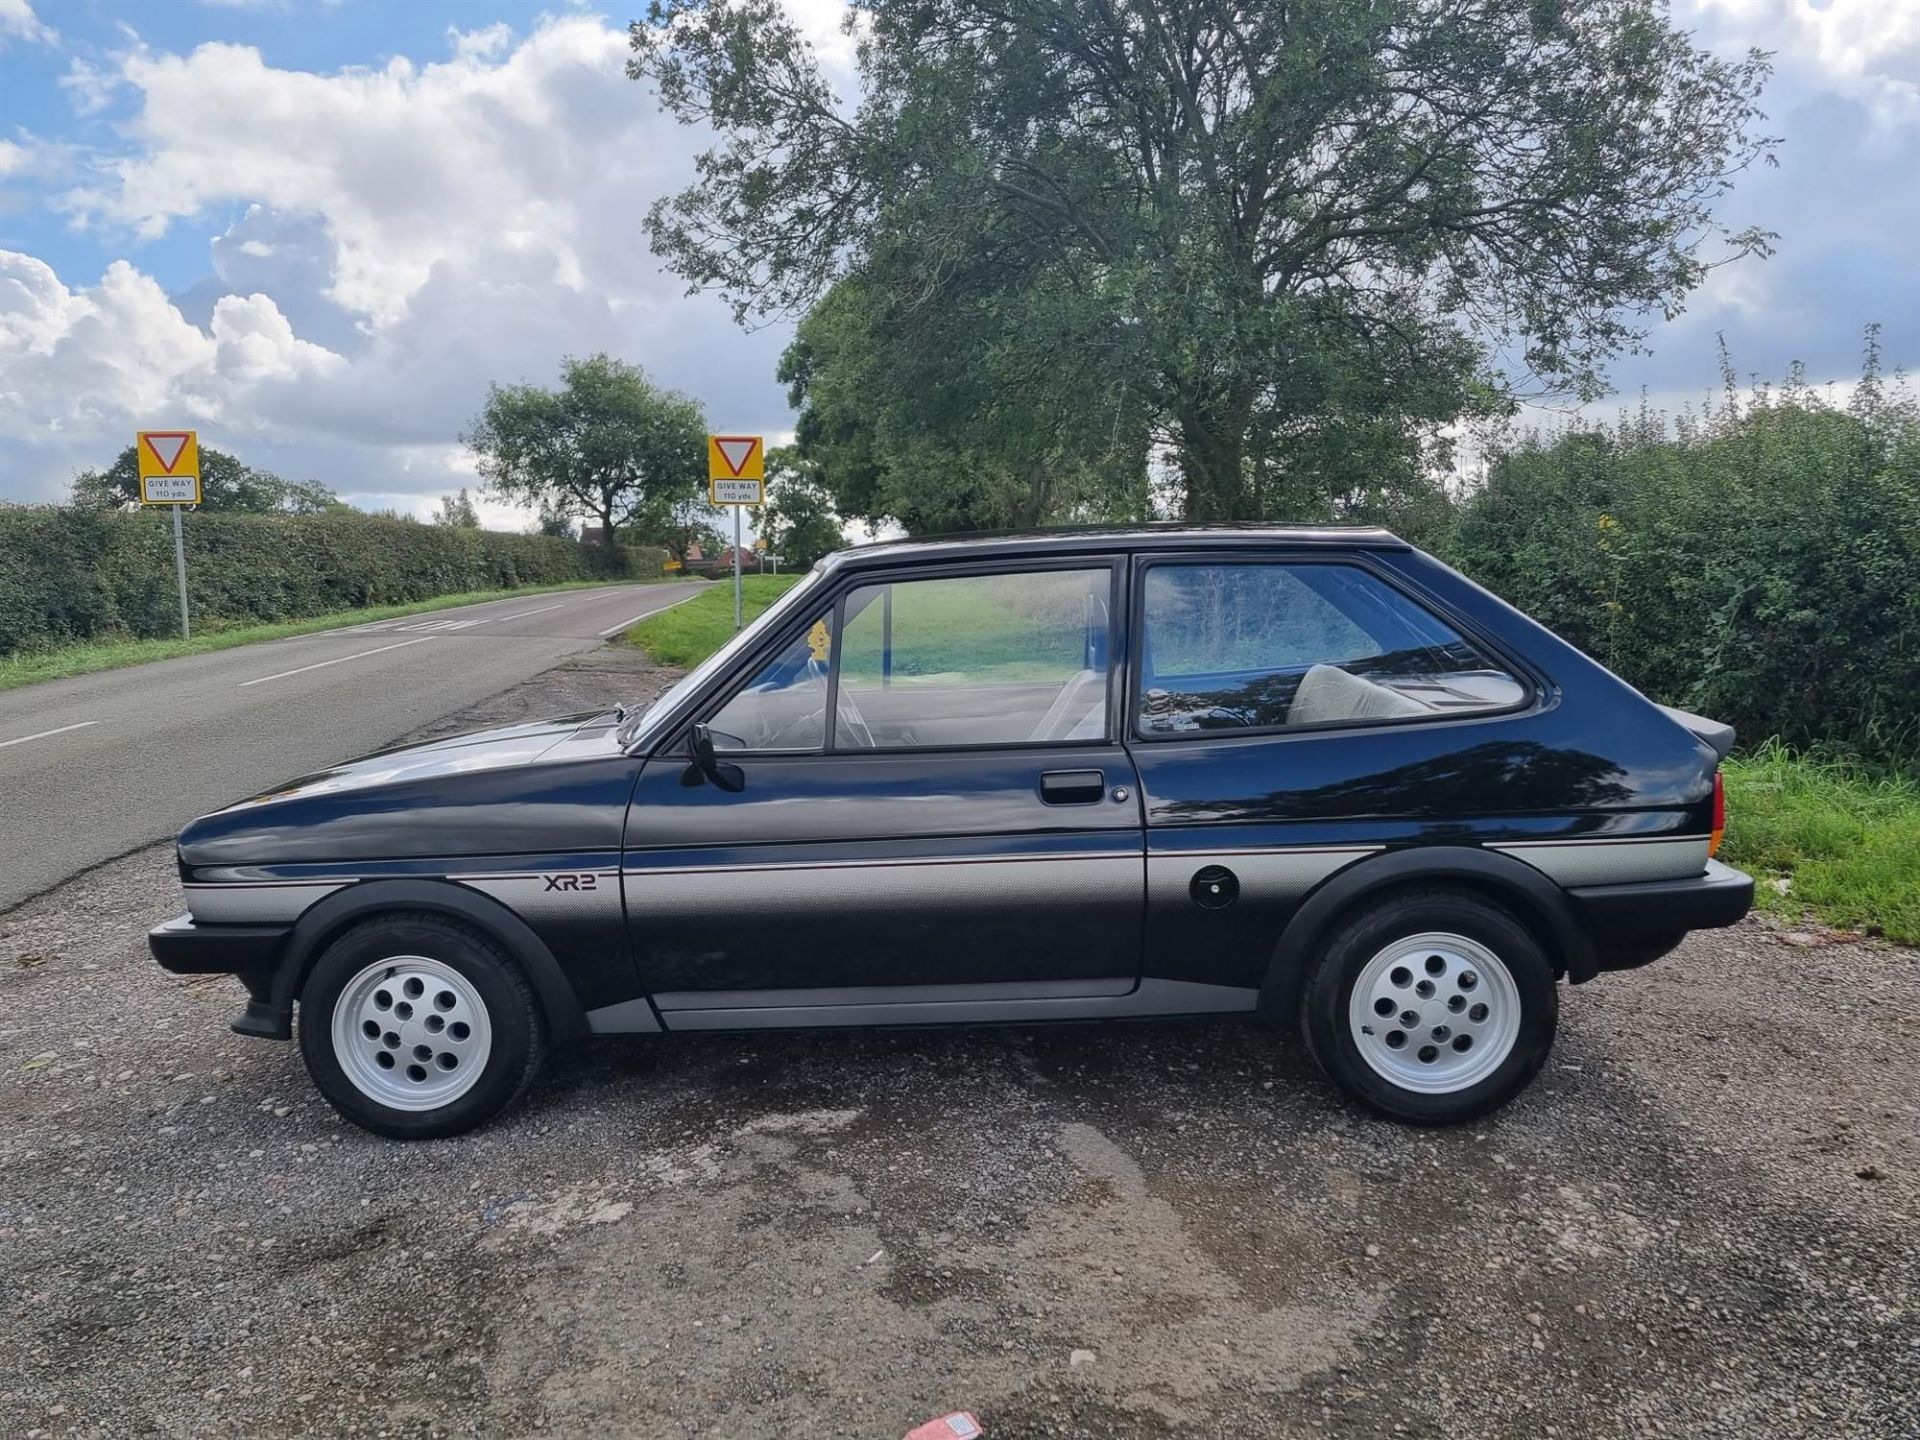 1982 Ford XR2 Mk1 - Image 10 of 10